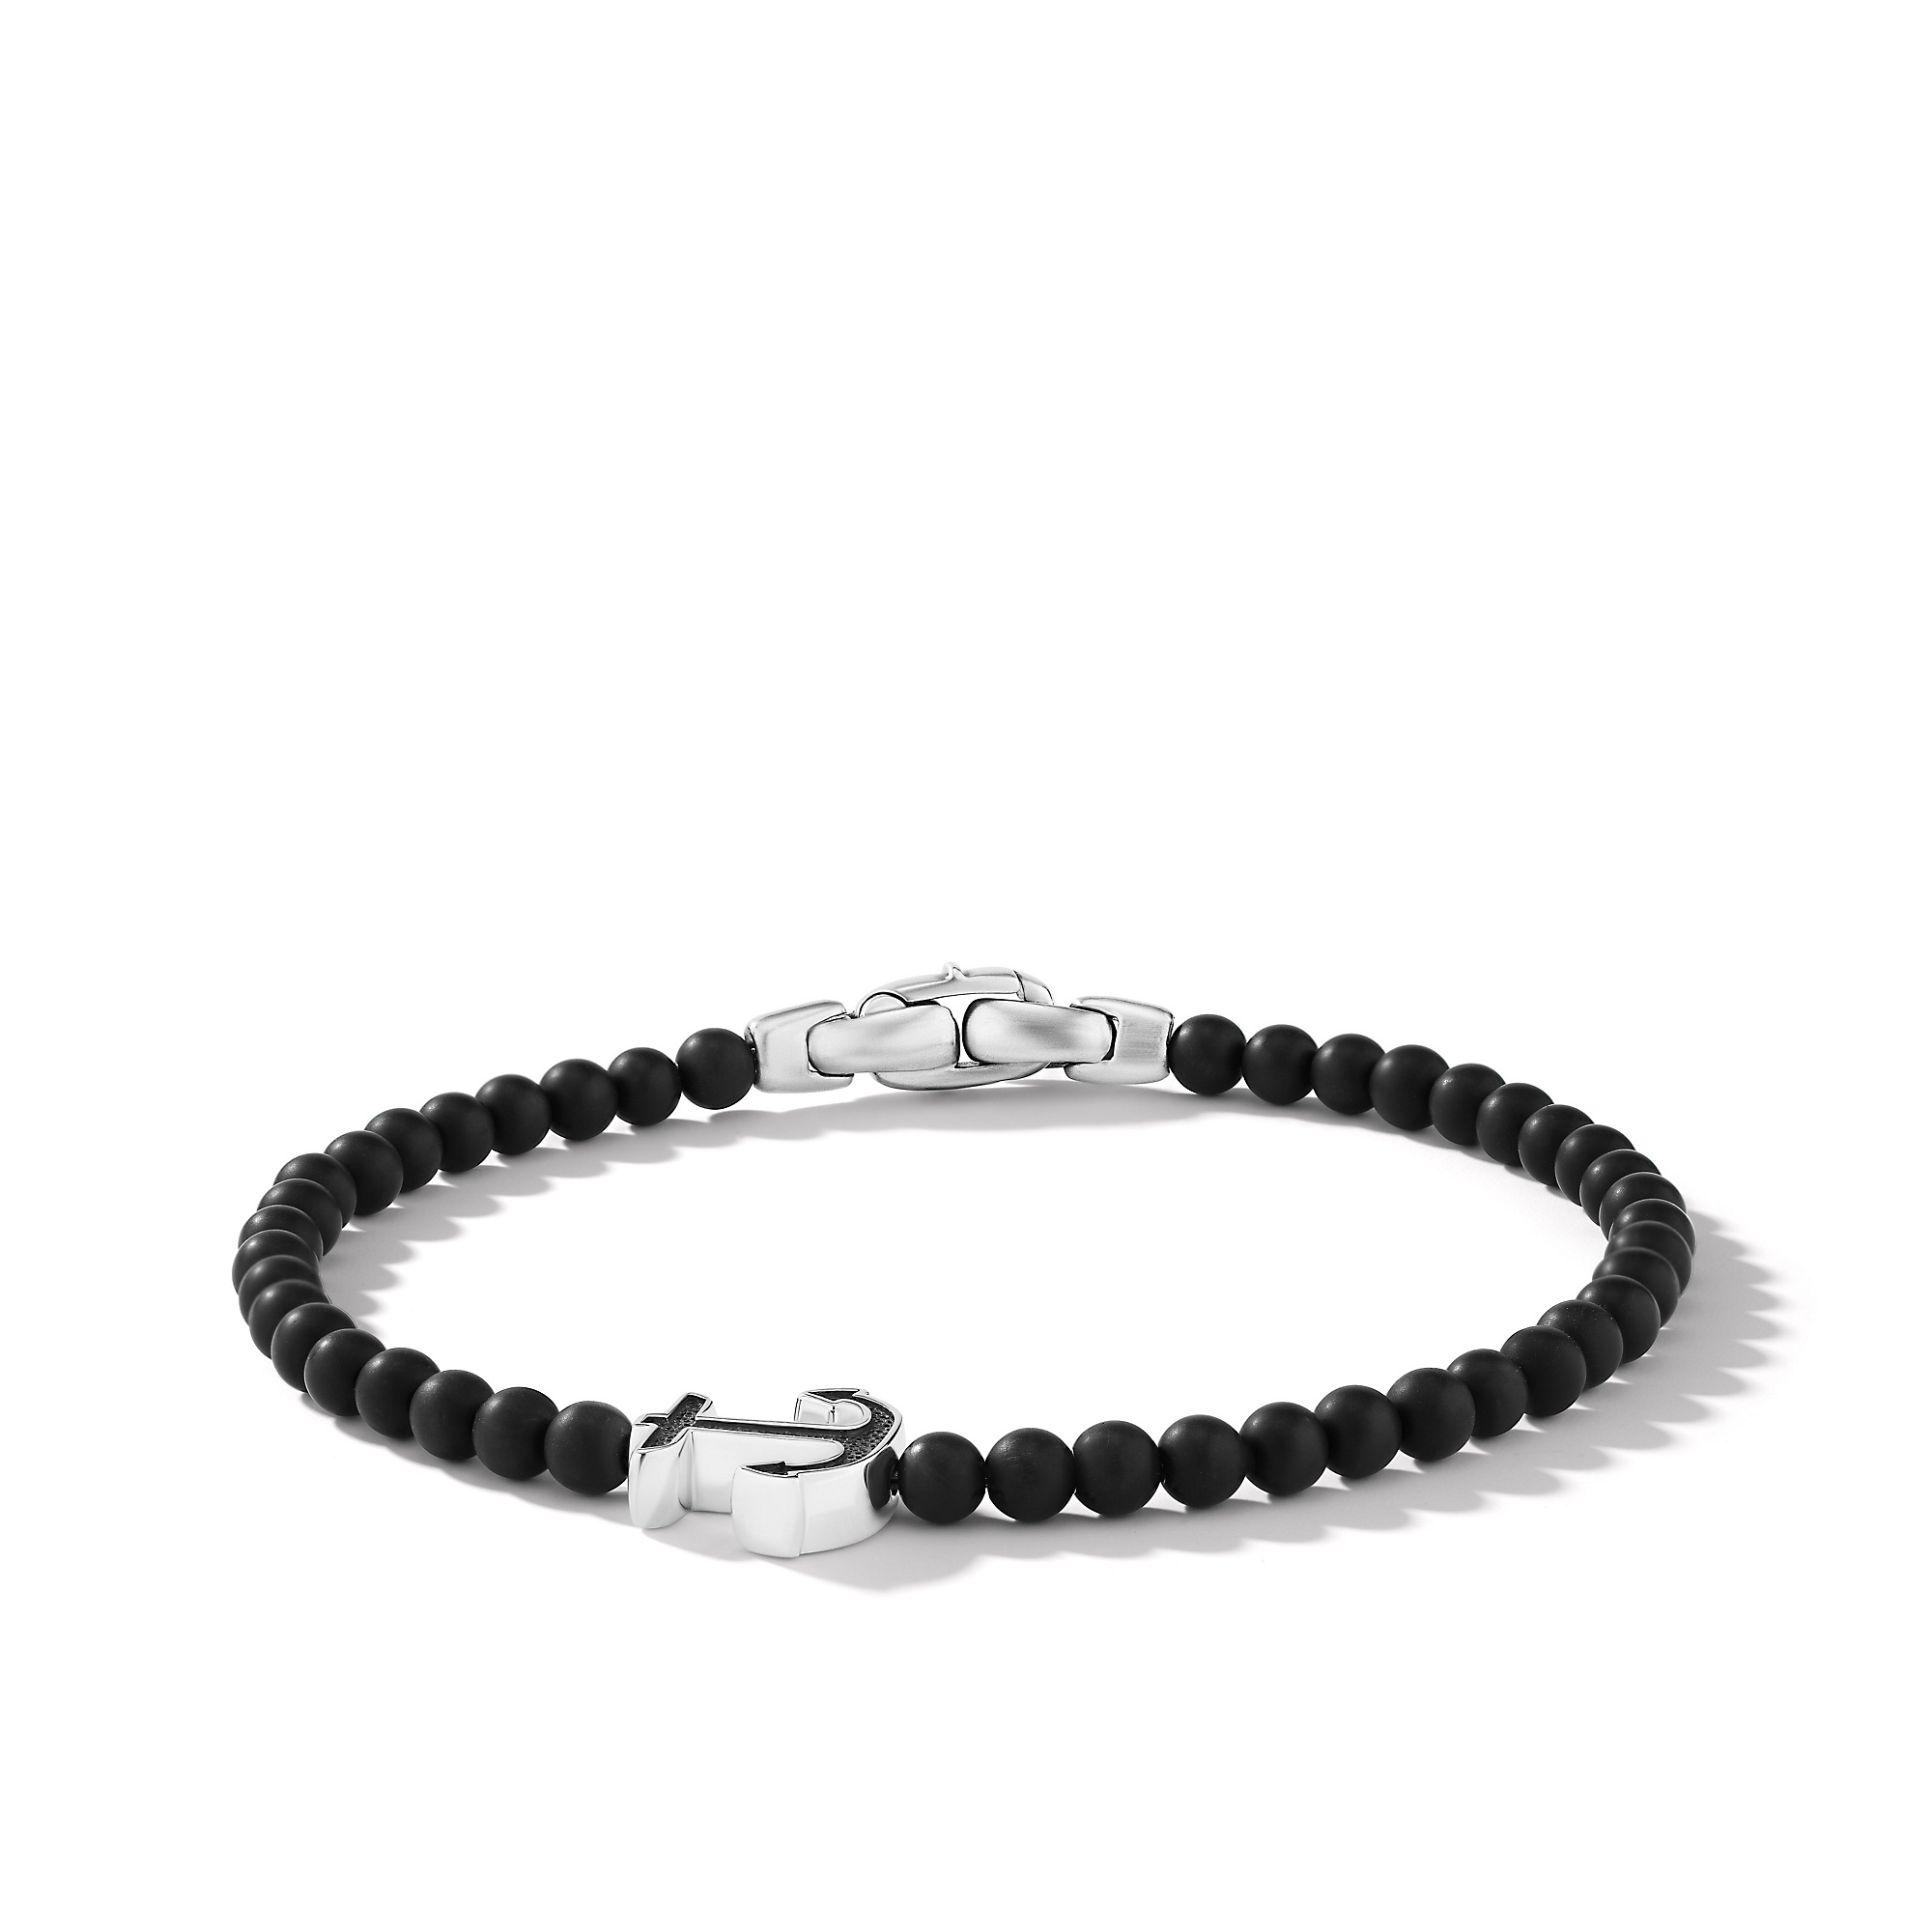 Spiritual Beads Anchor Bracelet in Sterling Silver with Black Onyx